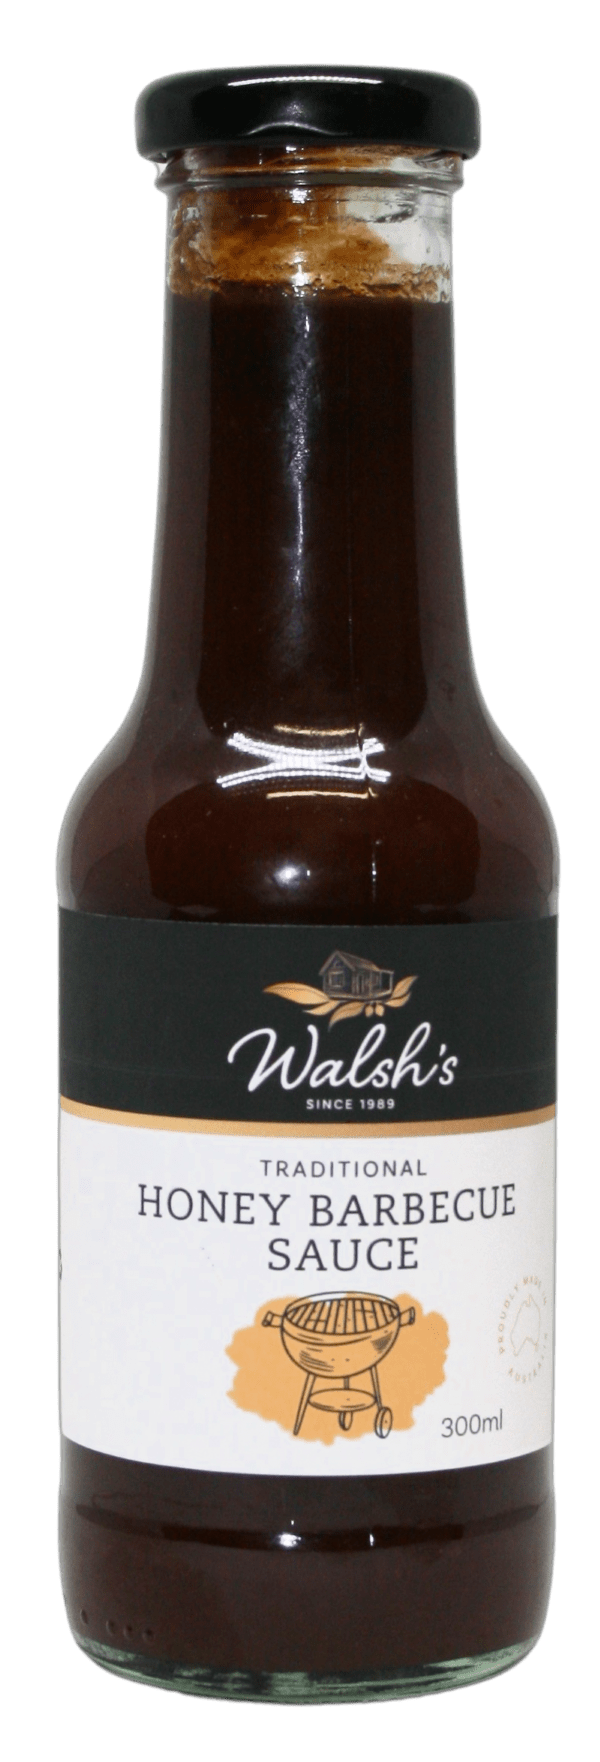 Walshs Honey Barbecue Sauce